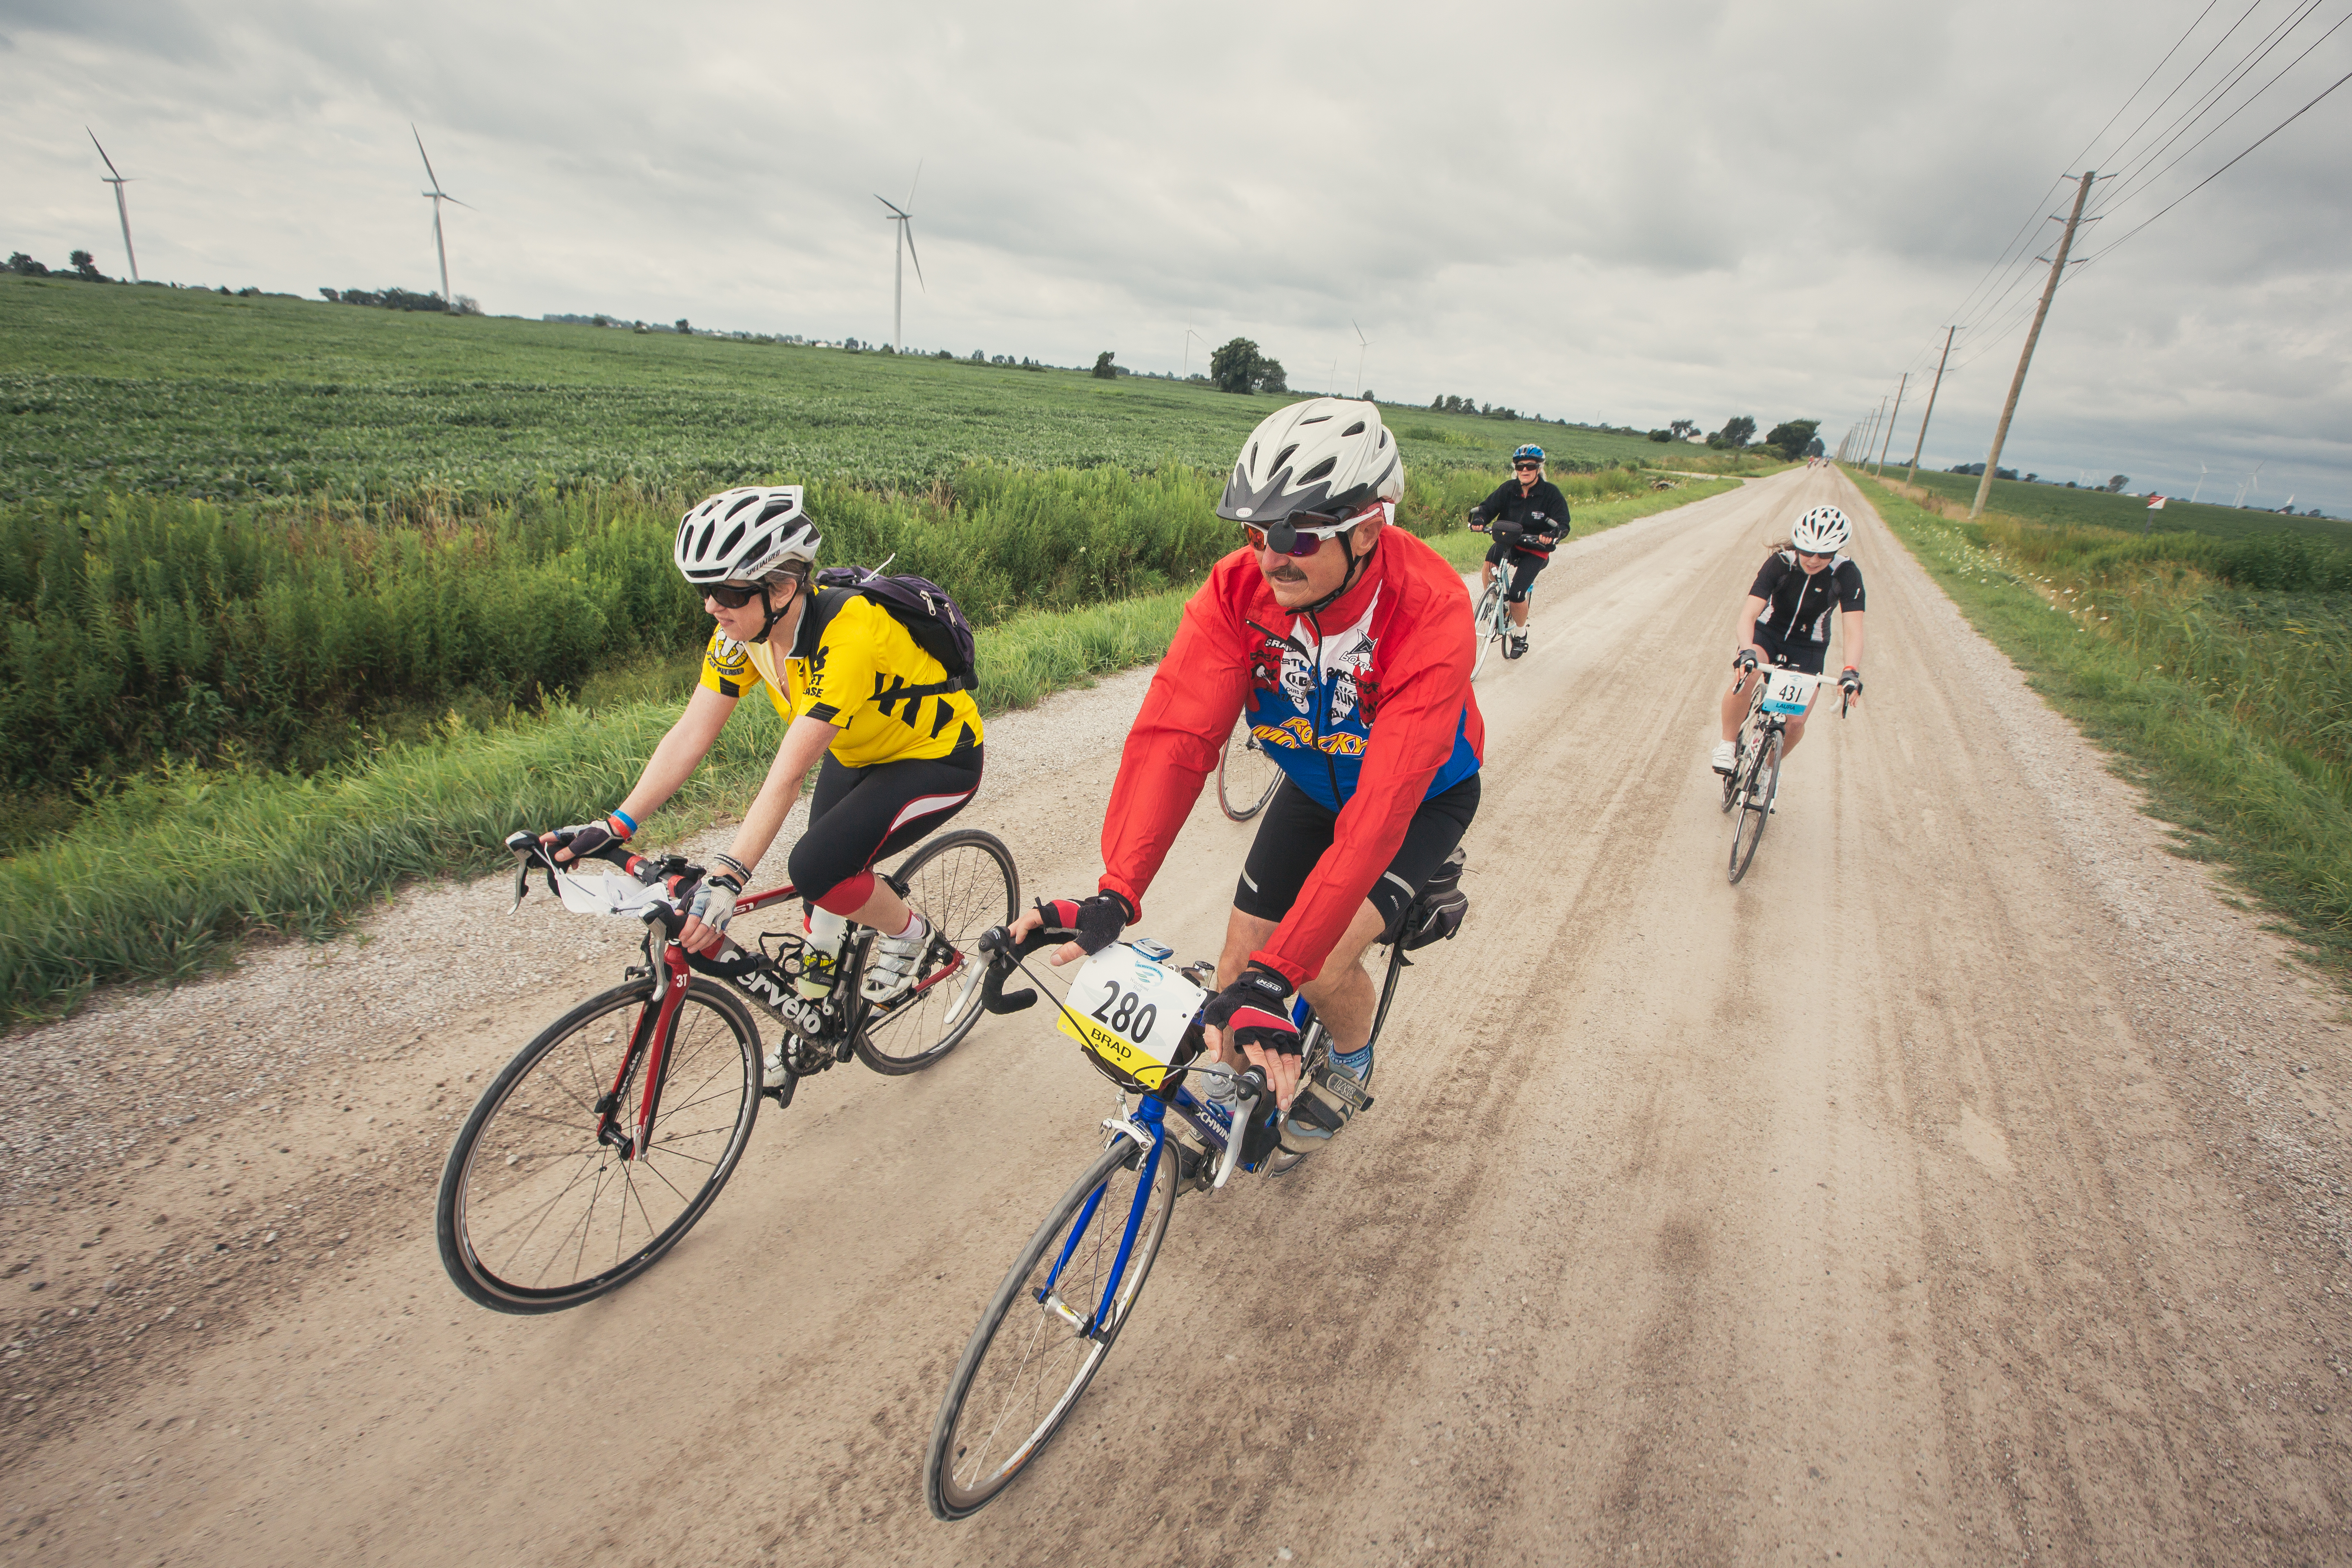 cyclists on dirt road 